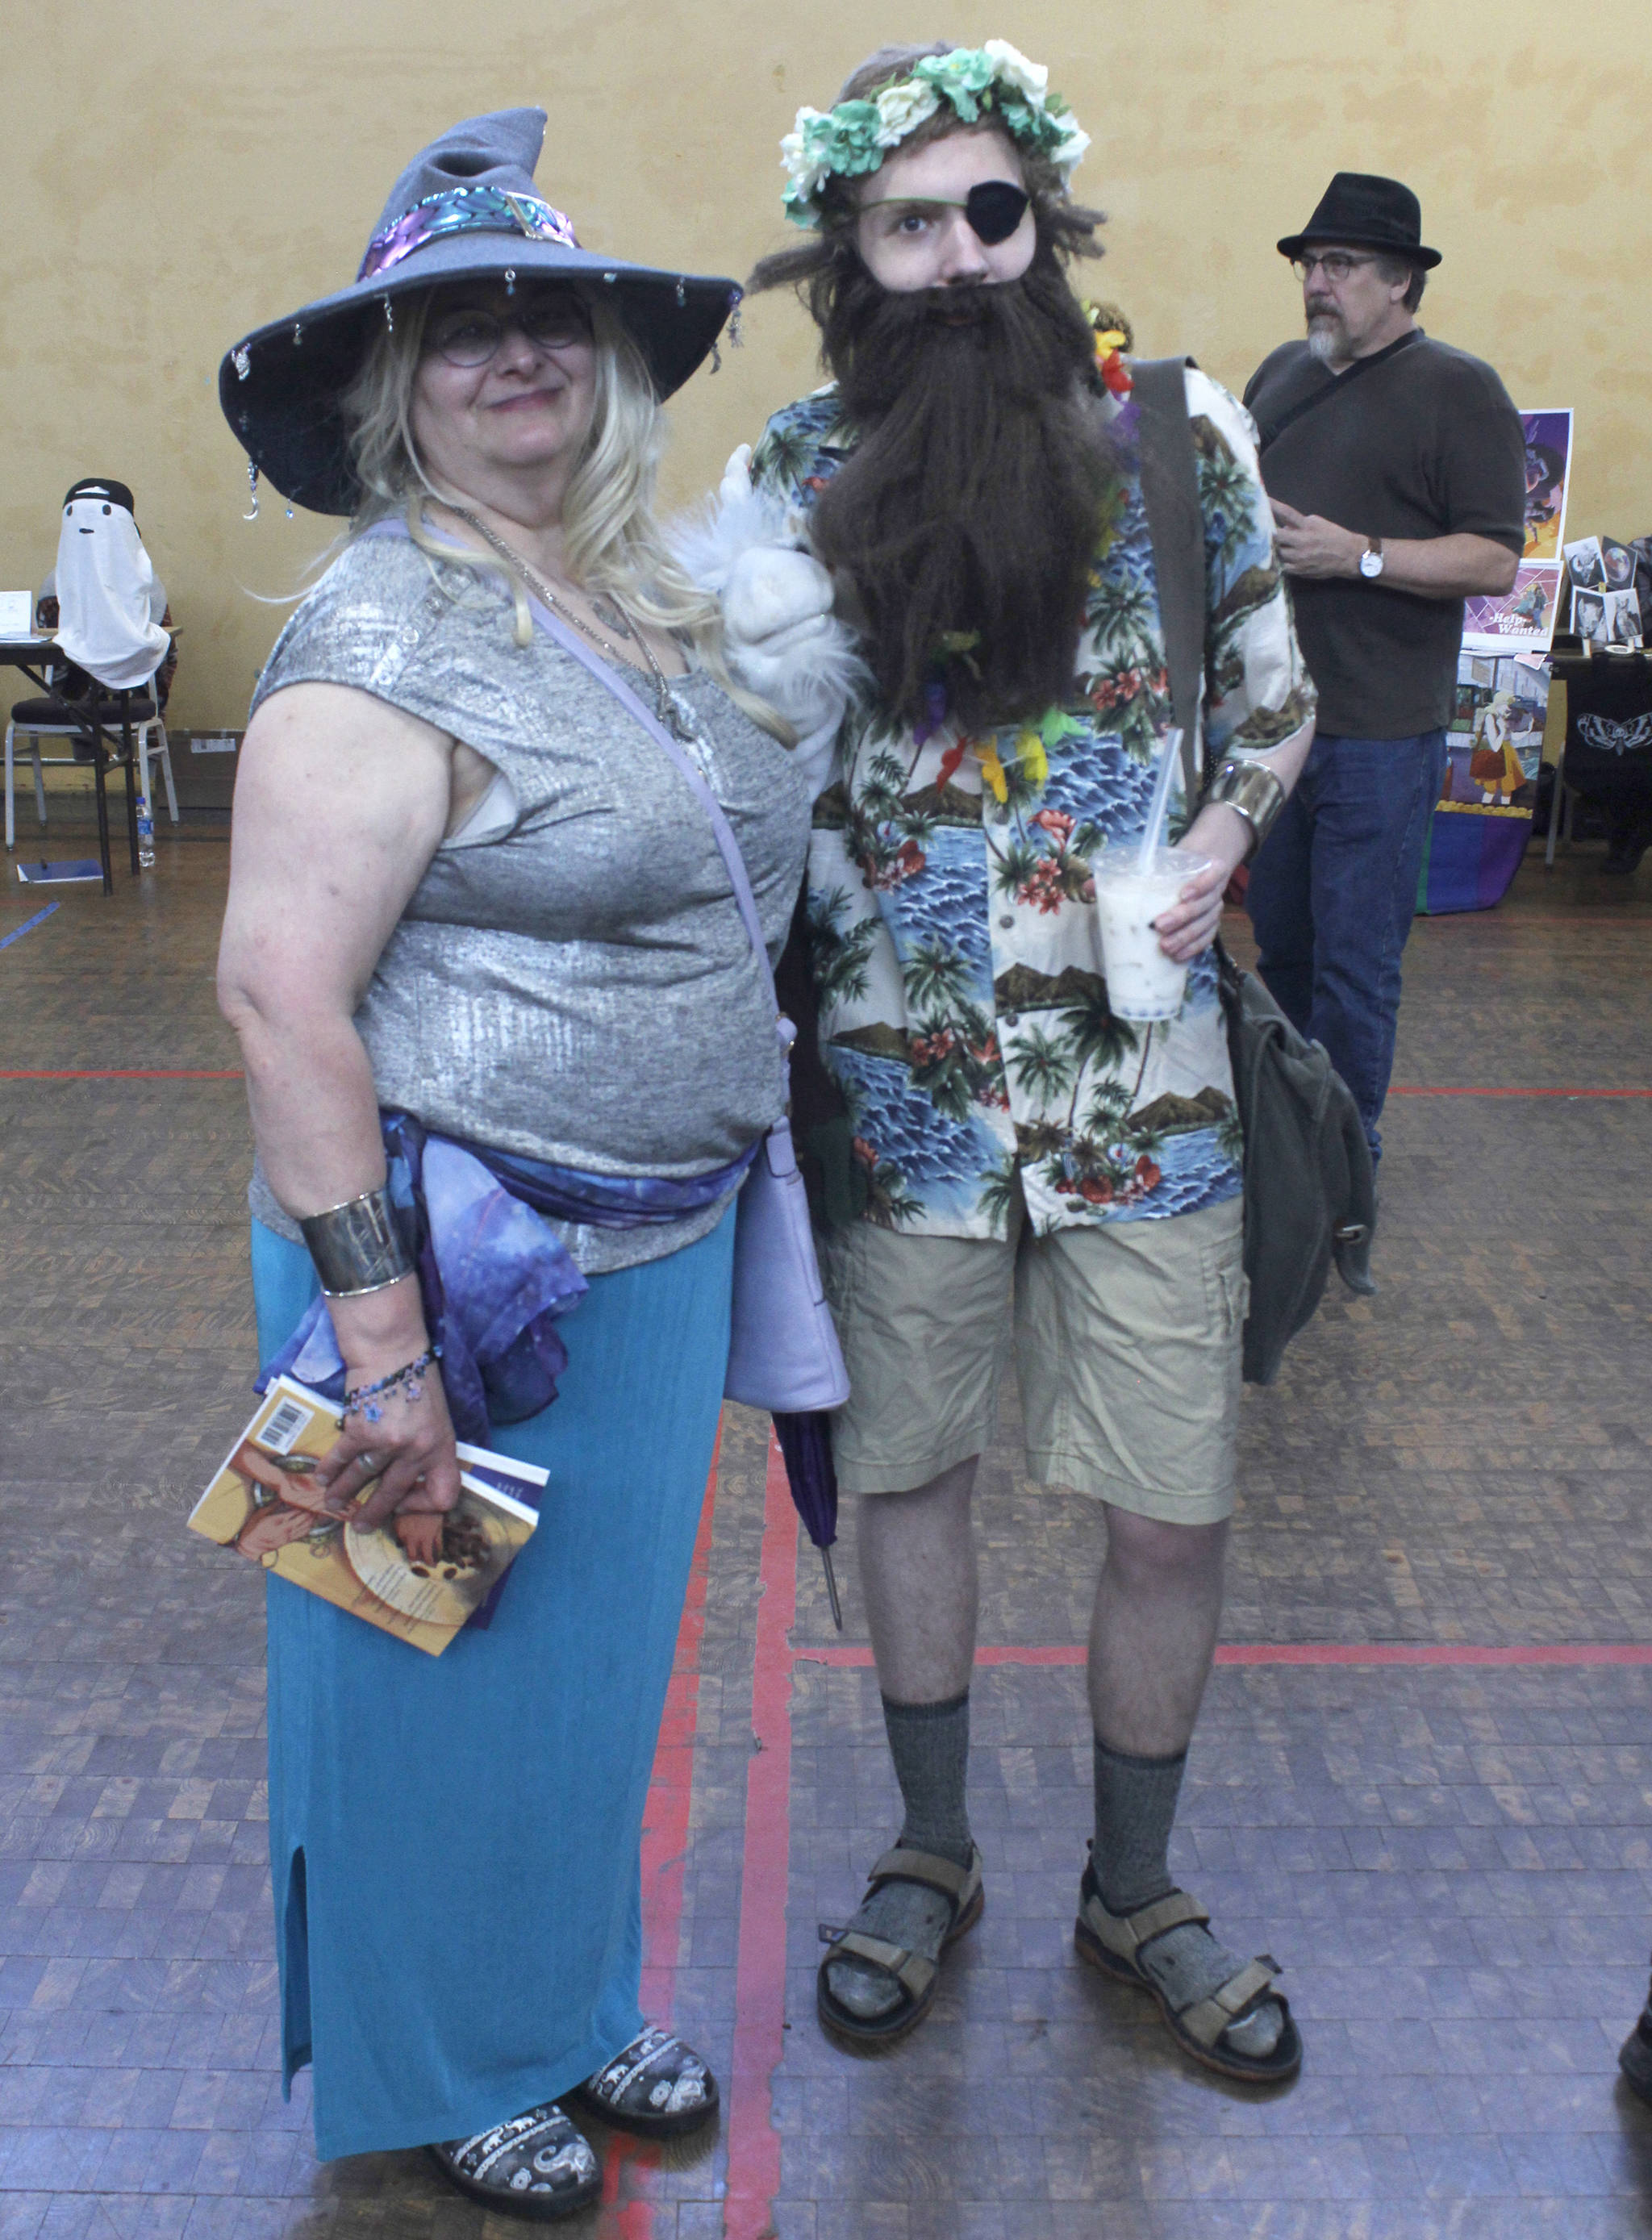 Rachel and Honesty Zahnd, as Taako and Merle from the Adventure Zone podcast, respectively, are pictured at the Alaska Robotics Mini-Con on Saturday, April 27, 2019. (Alex McCarthy | Juneau Empire)